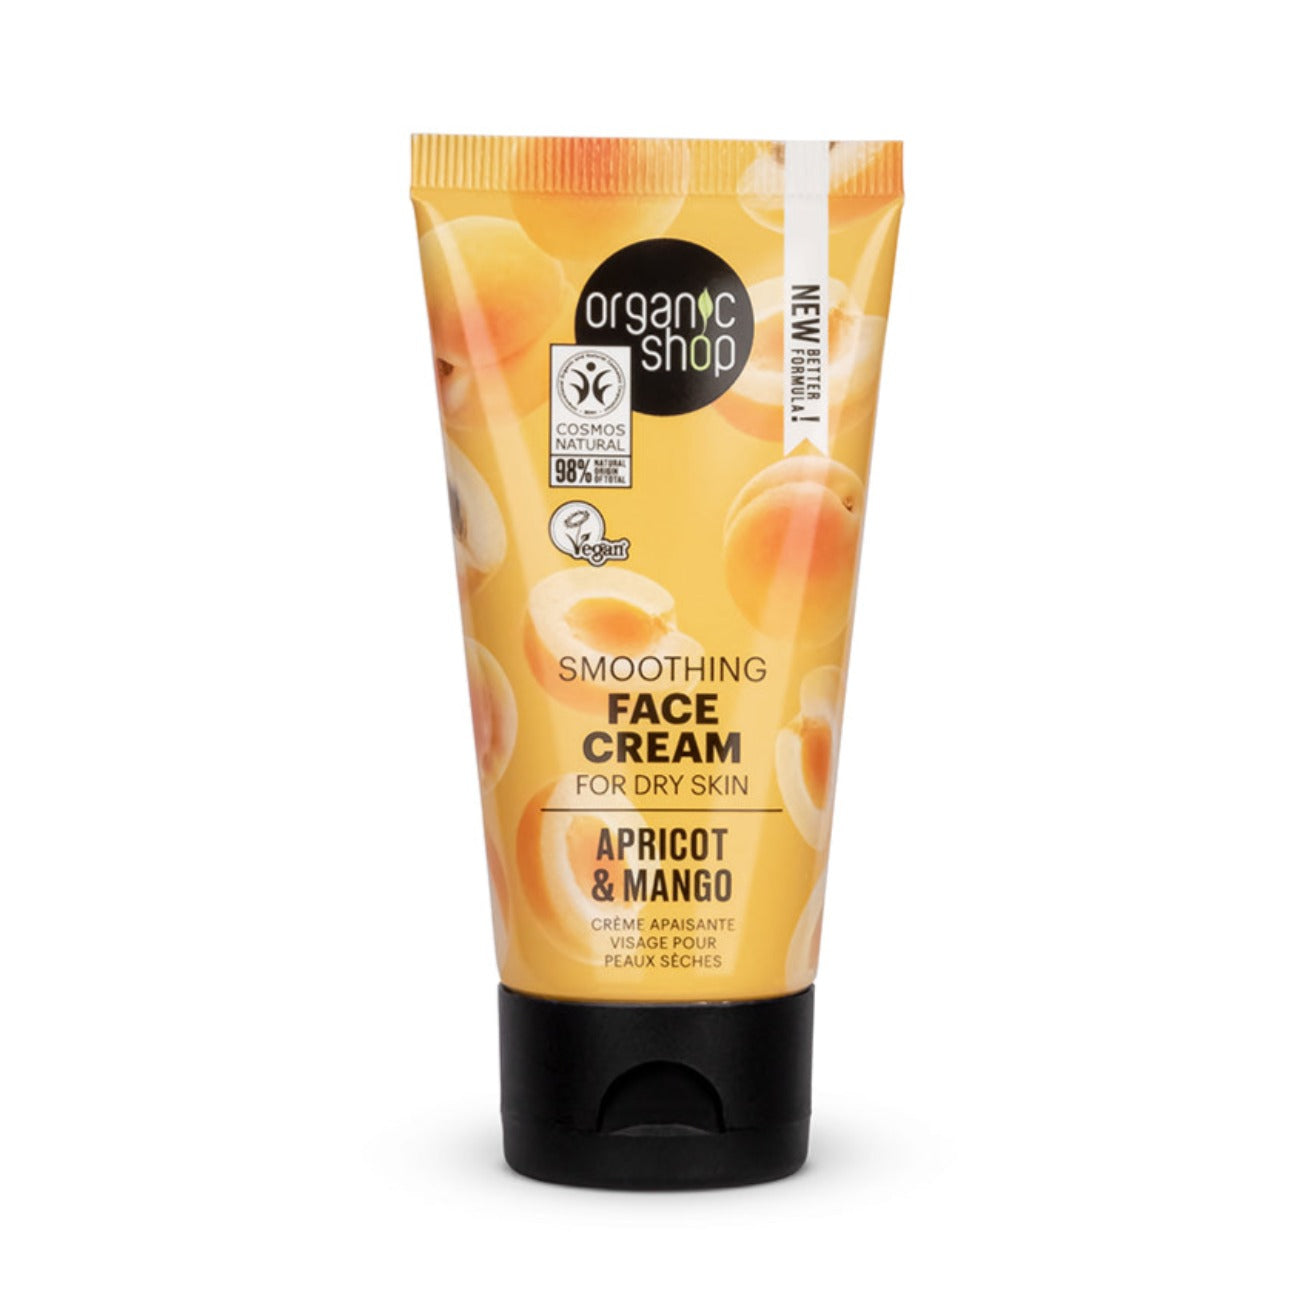 Apricot and Mango Smoothing Face Cream for Dry Skin 50ml